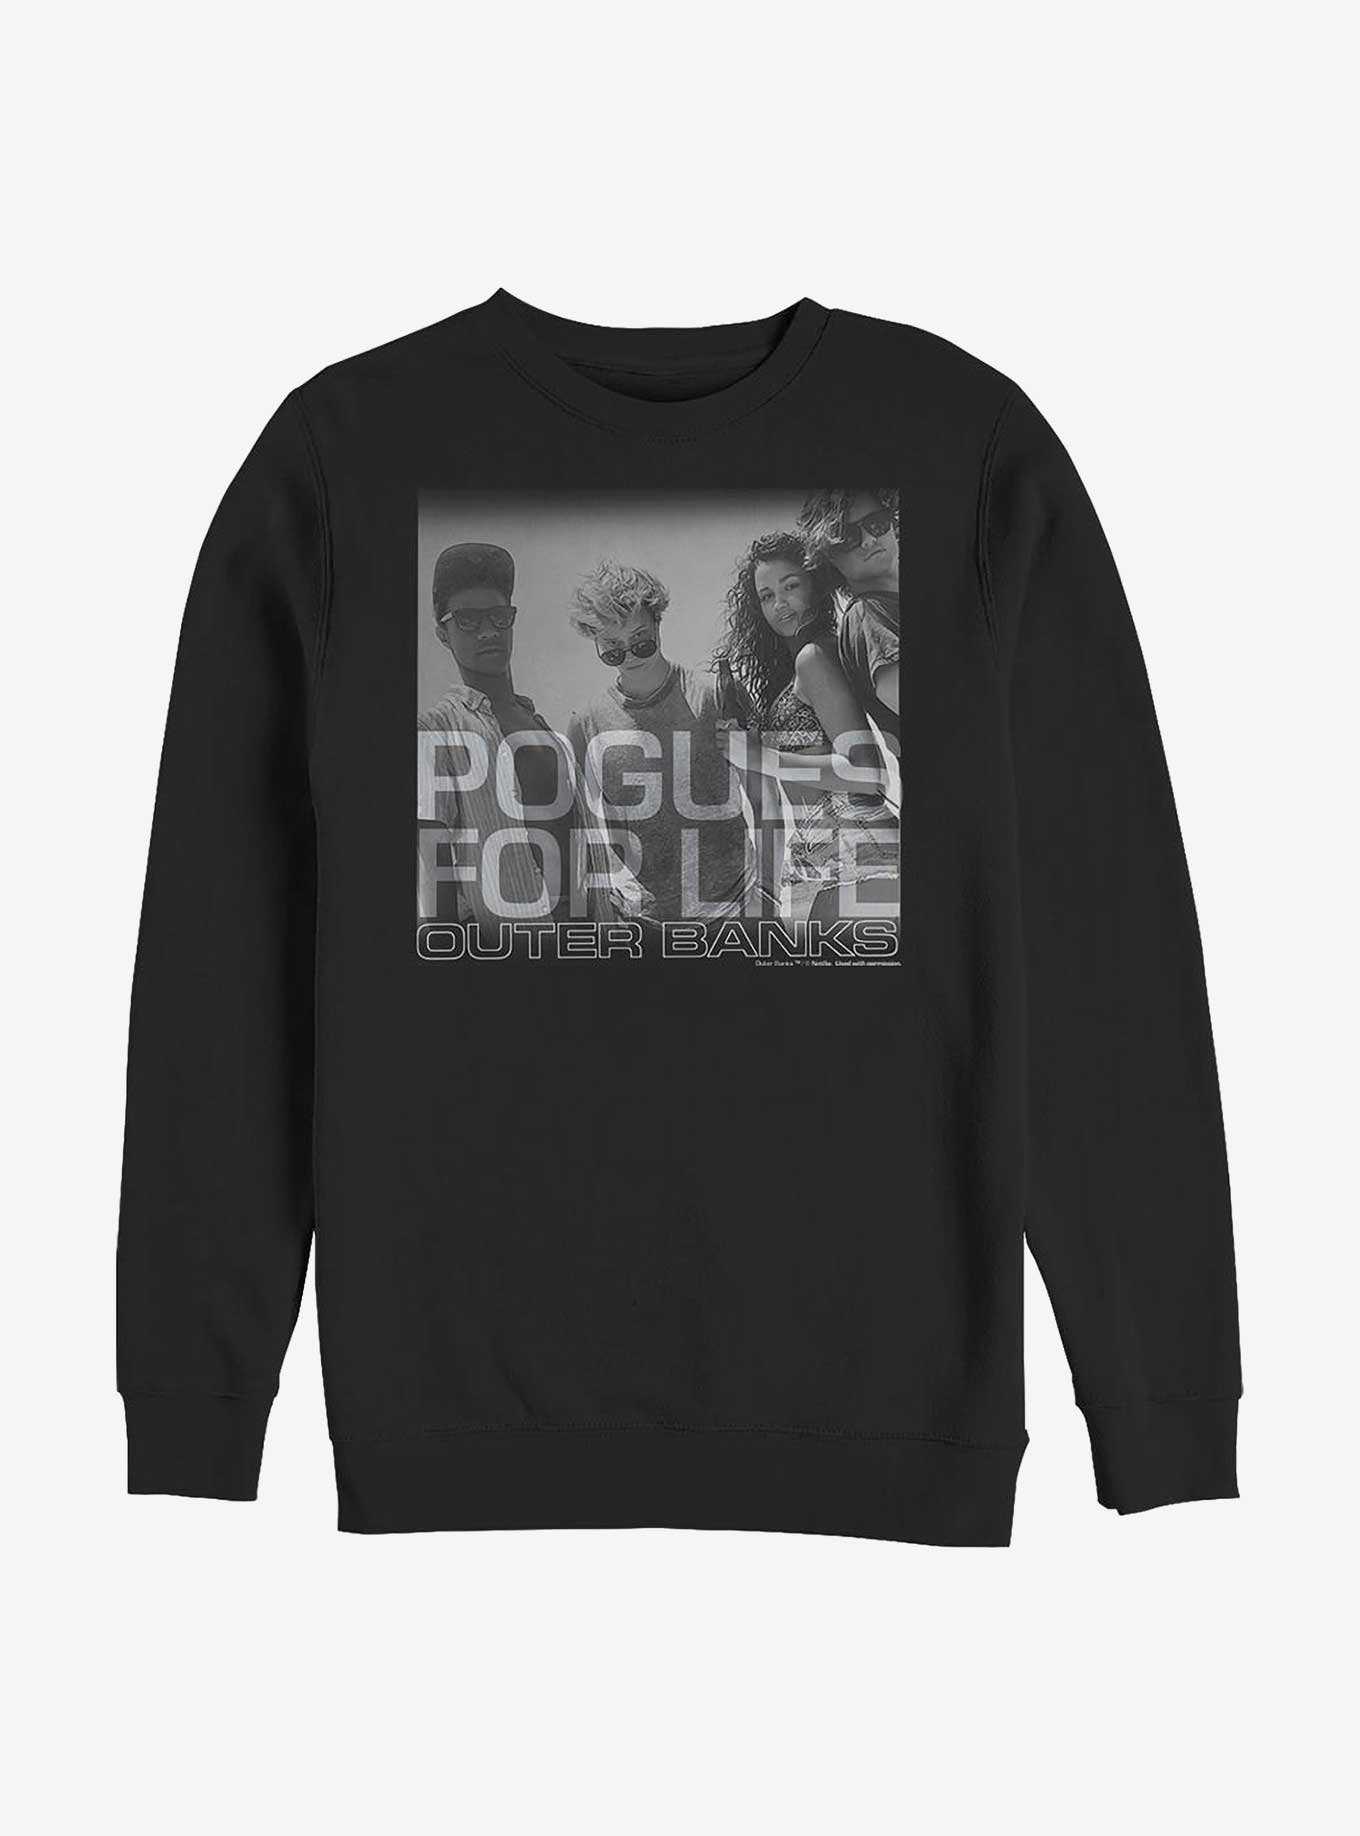 Outer Banks Pogues For Life Sweatshirt, , hi-res